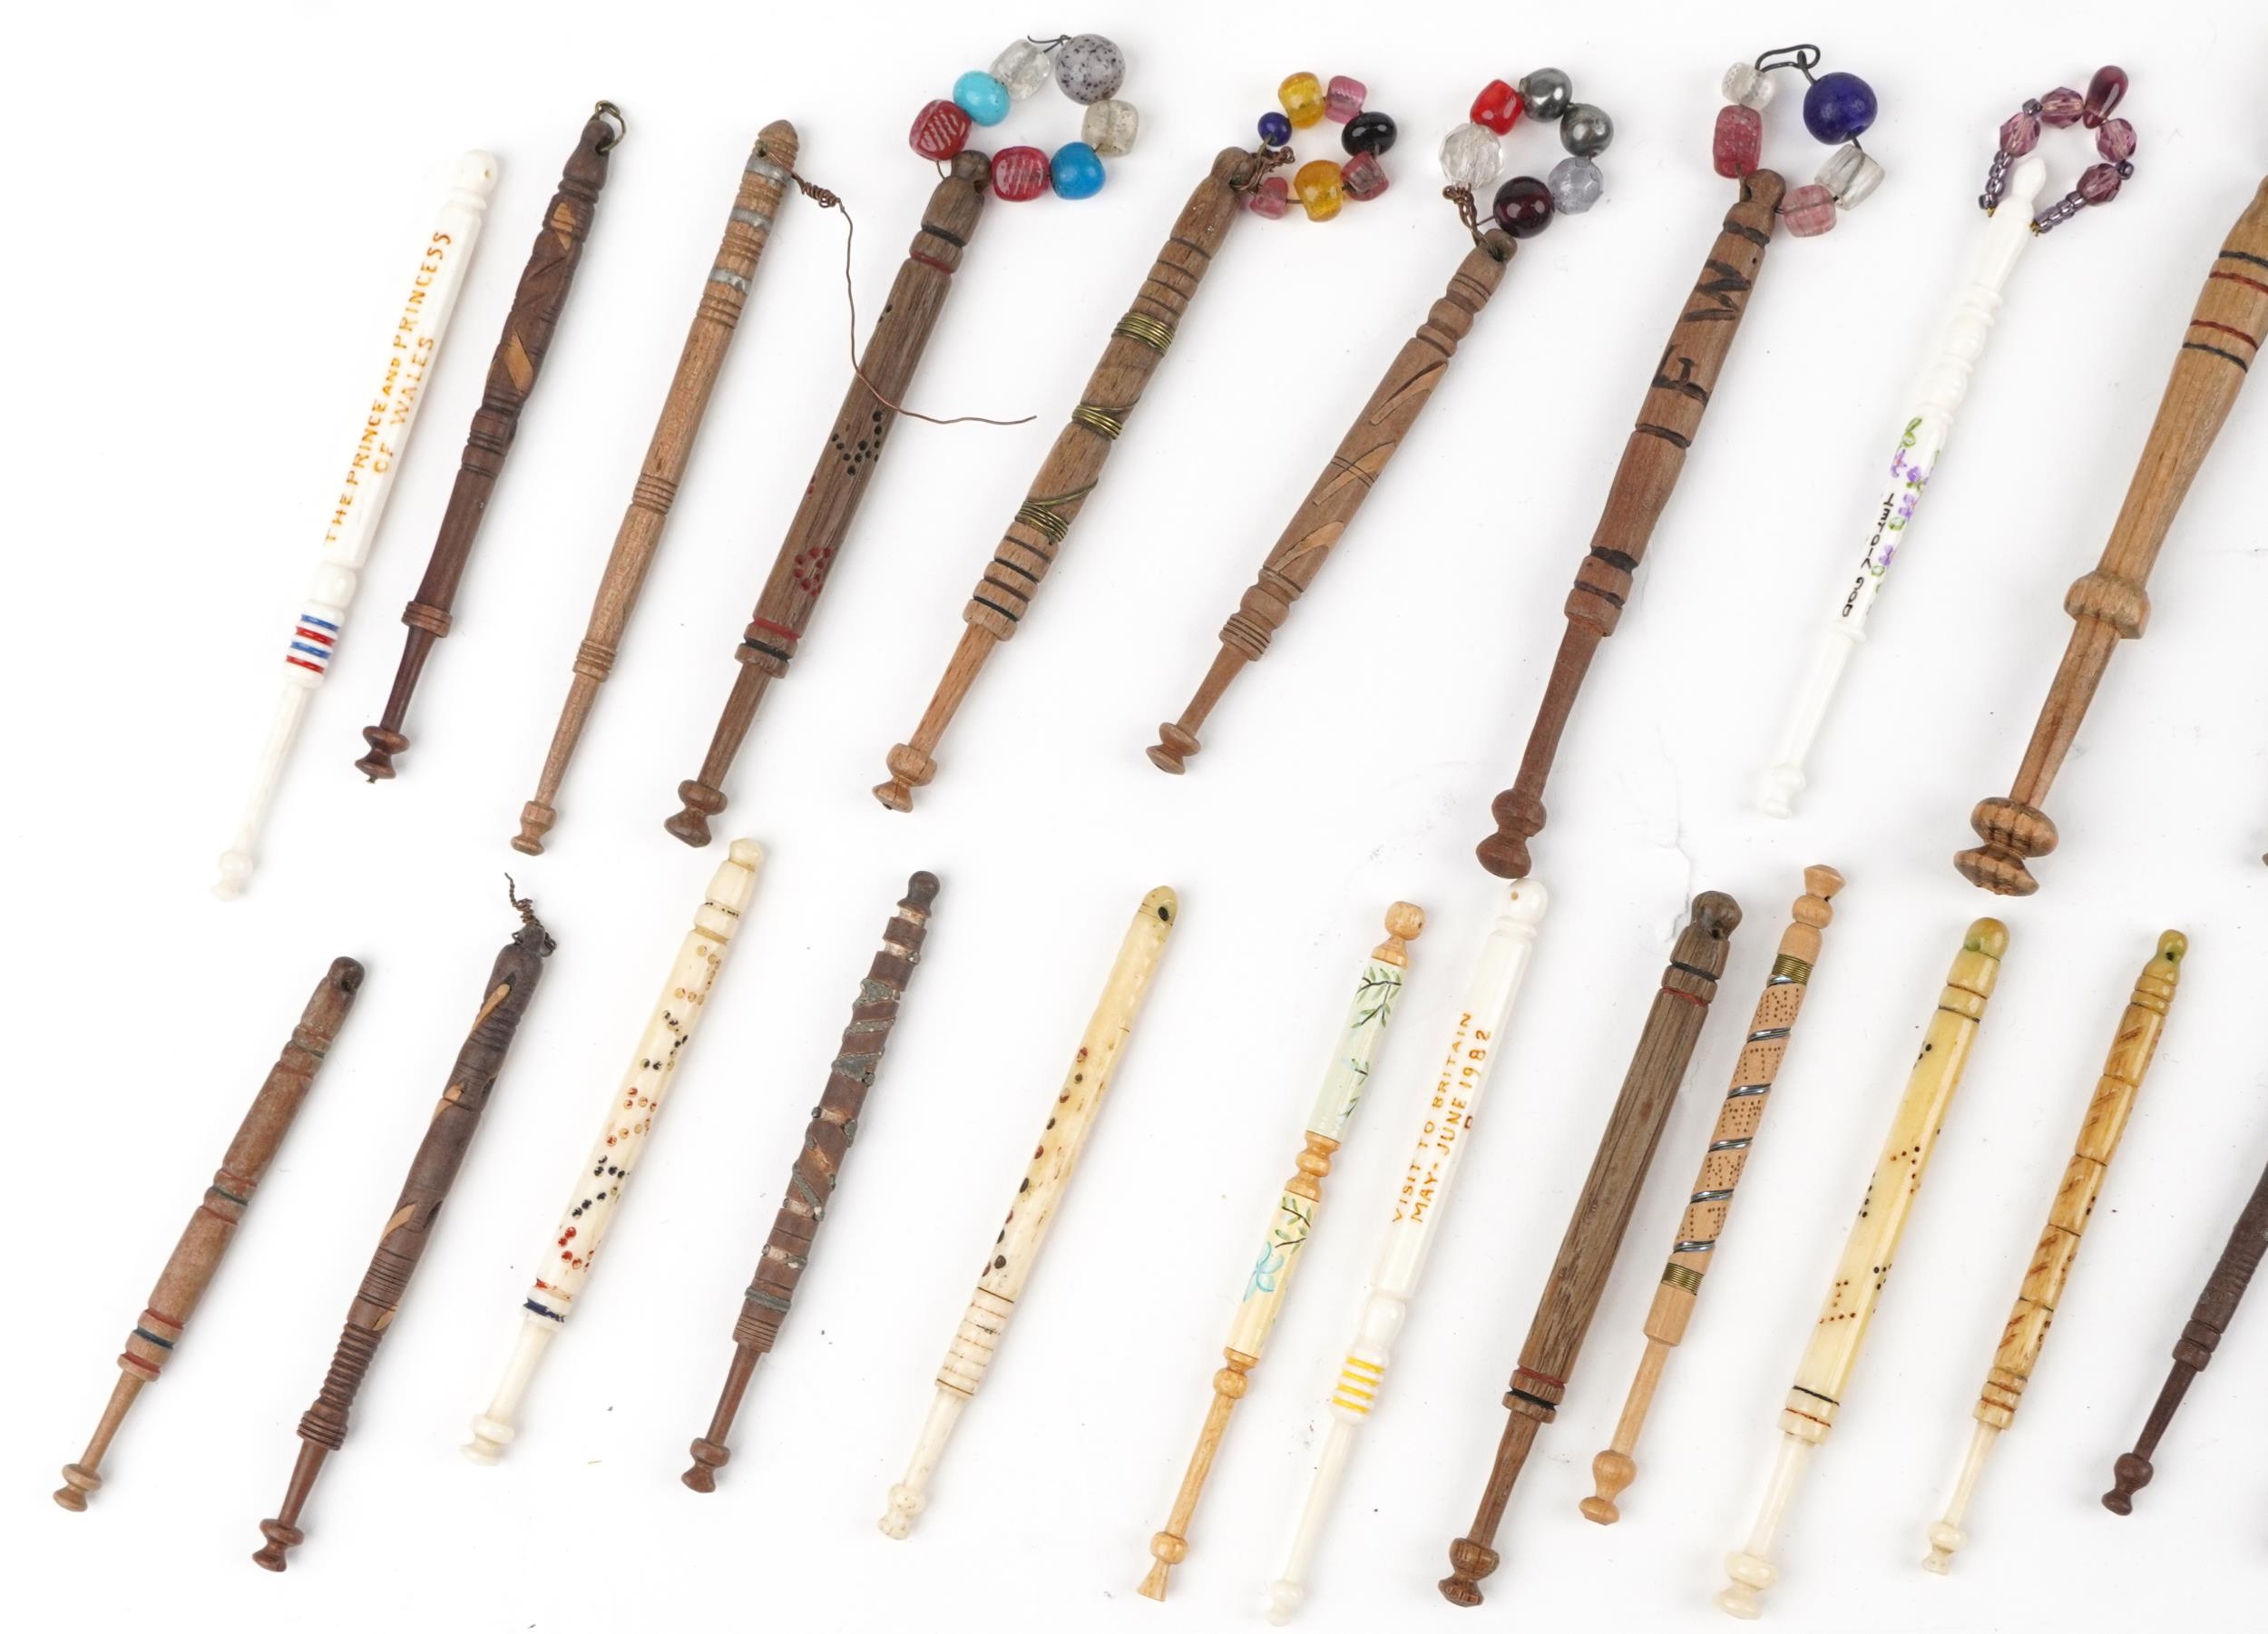 Collection of sewing interest carved bone and hardwood lace making bobbins with beads - Image 4 of 5